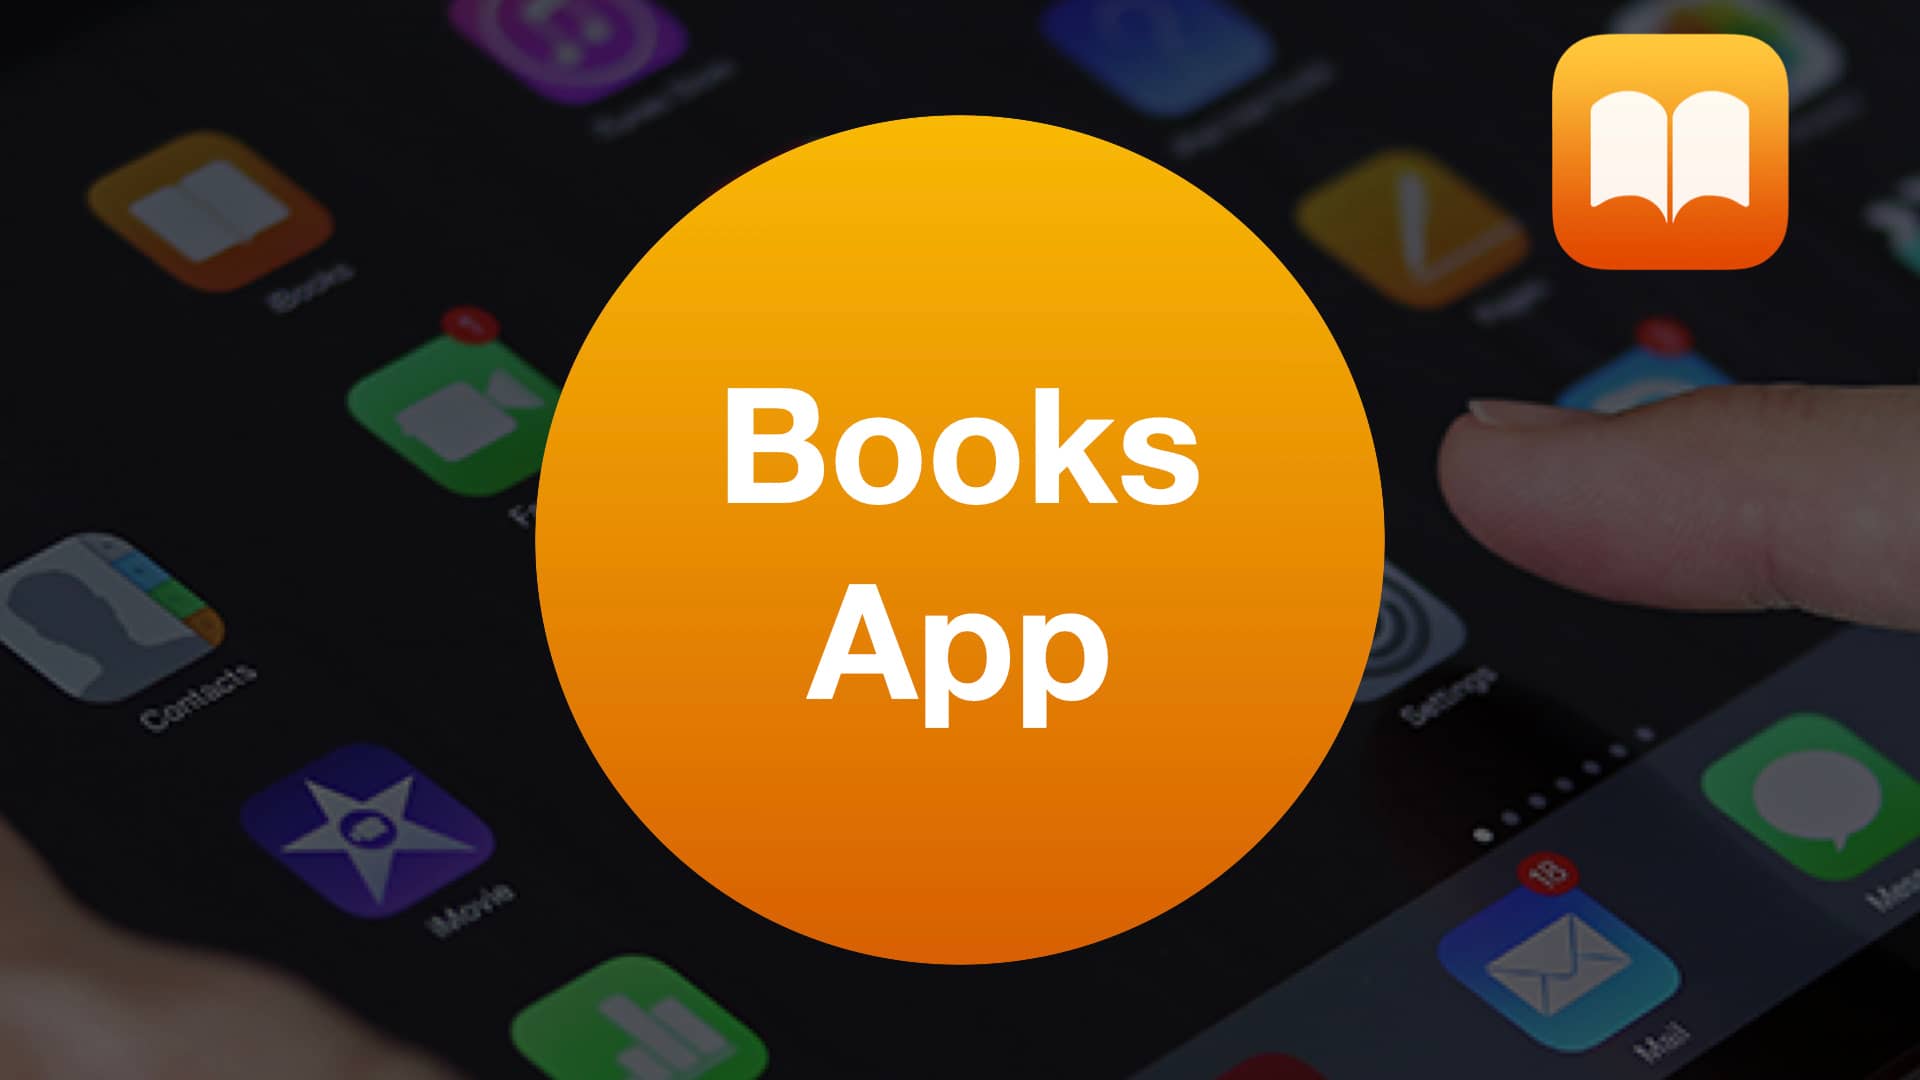 The Complete Guide to the Books app for iOS15 or later